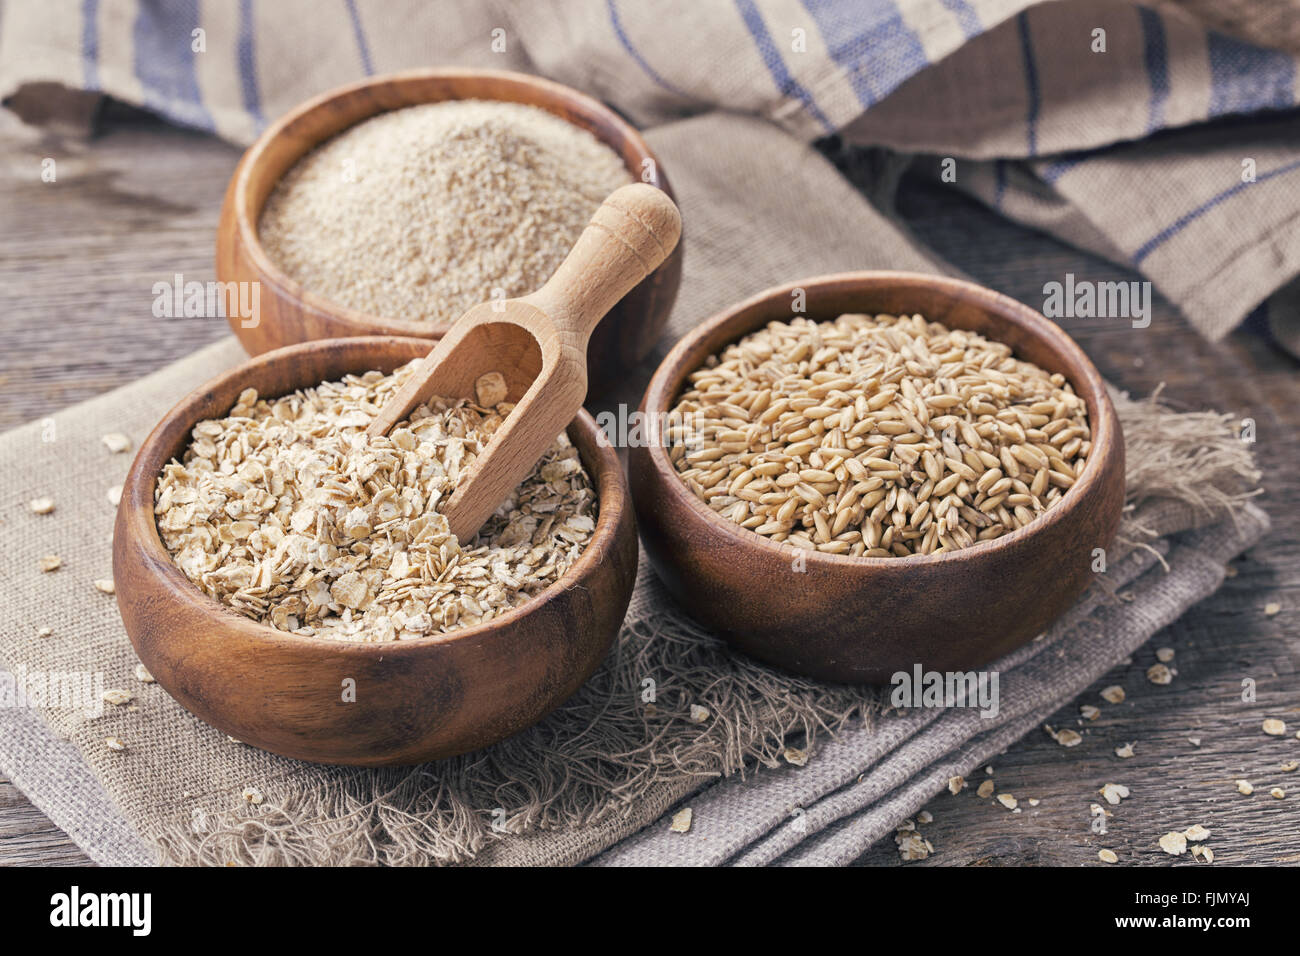 Oat flakes, seeds and bran in bowls Stock Photo